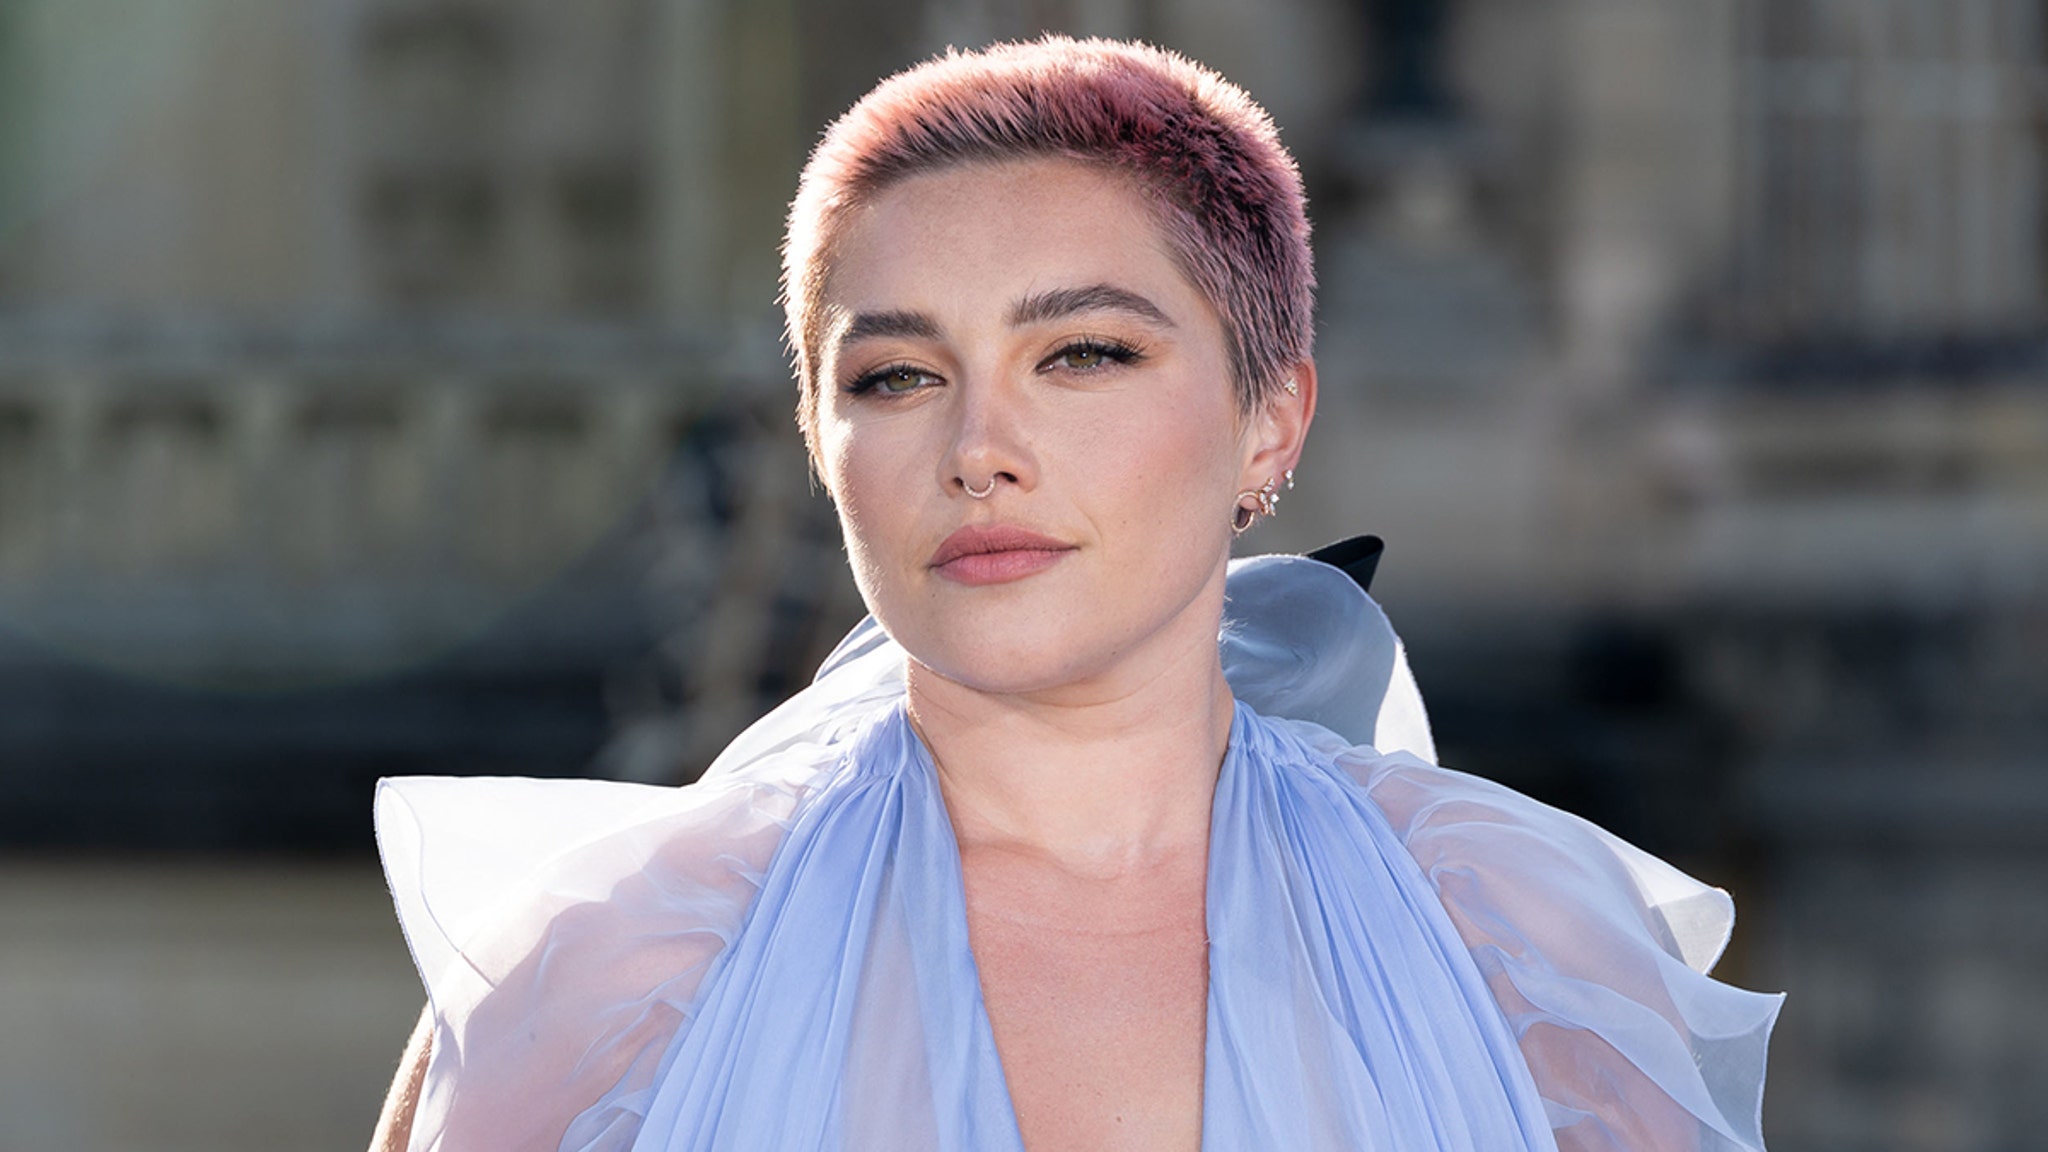 Florence Pugh's Sheer Gown Foretells 'Prolonged Nudity' in 'Oppenheimer'